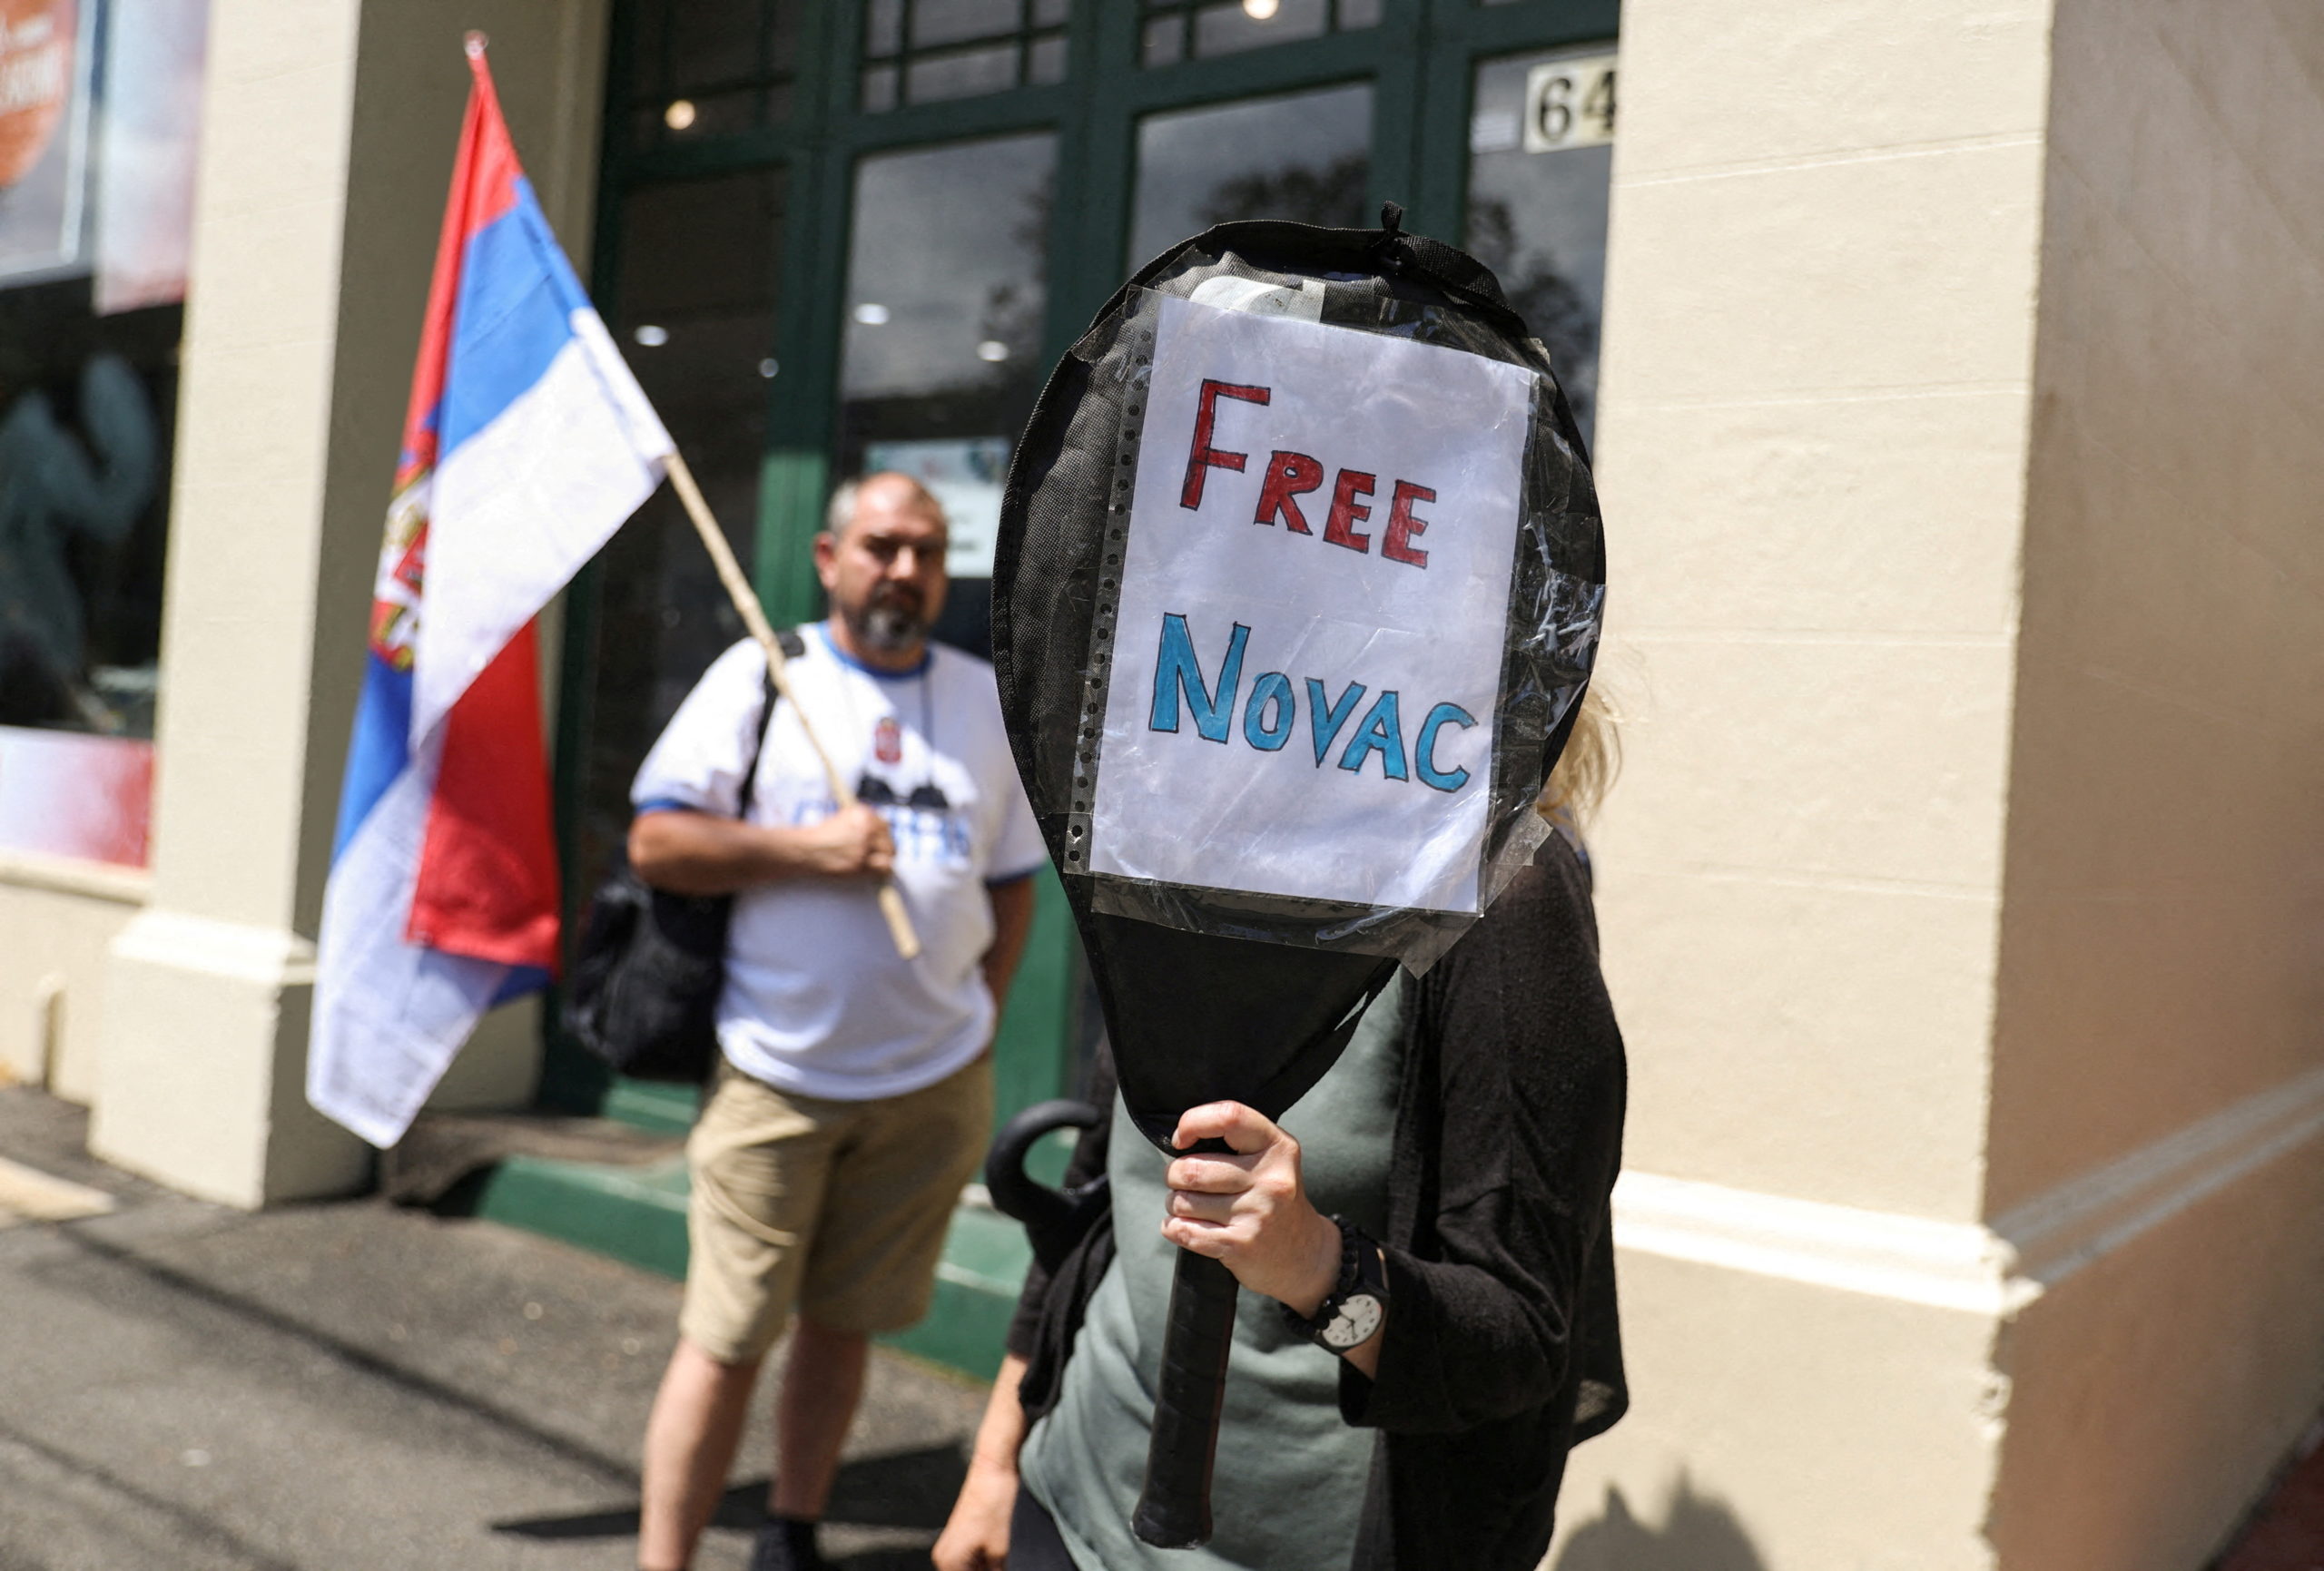 FILE PHOTO: A supporter of Serbian tennis player Novak Djokovic holds up a sign outside the Park Hotel, where the star athlete is believed to be held while he stays in Australia, in Melbourne, Australia, January 7, 2022.